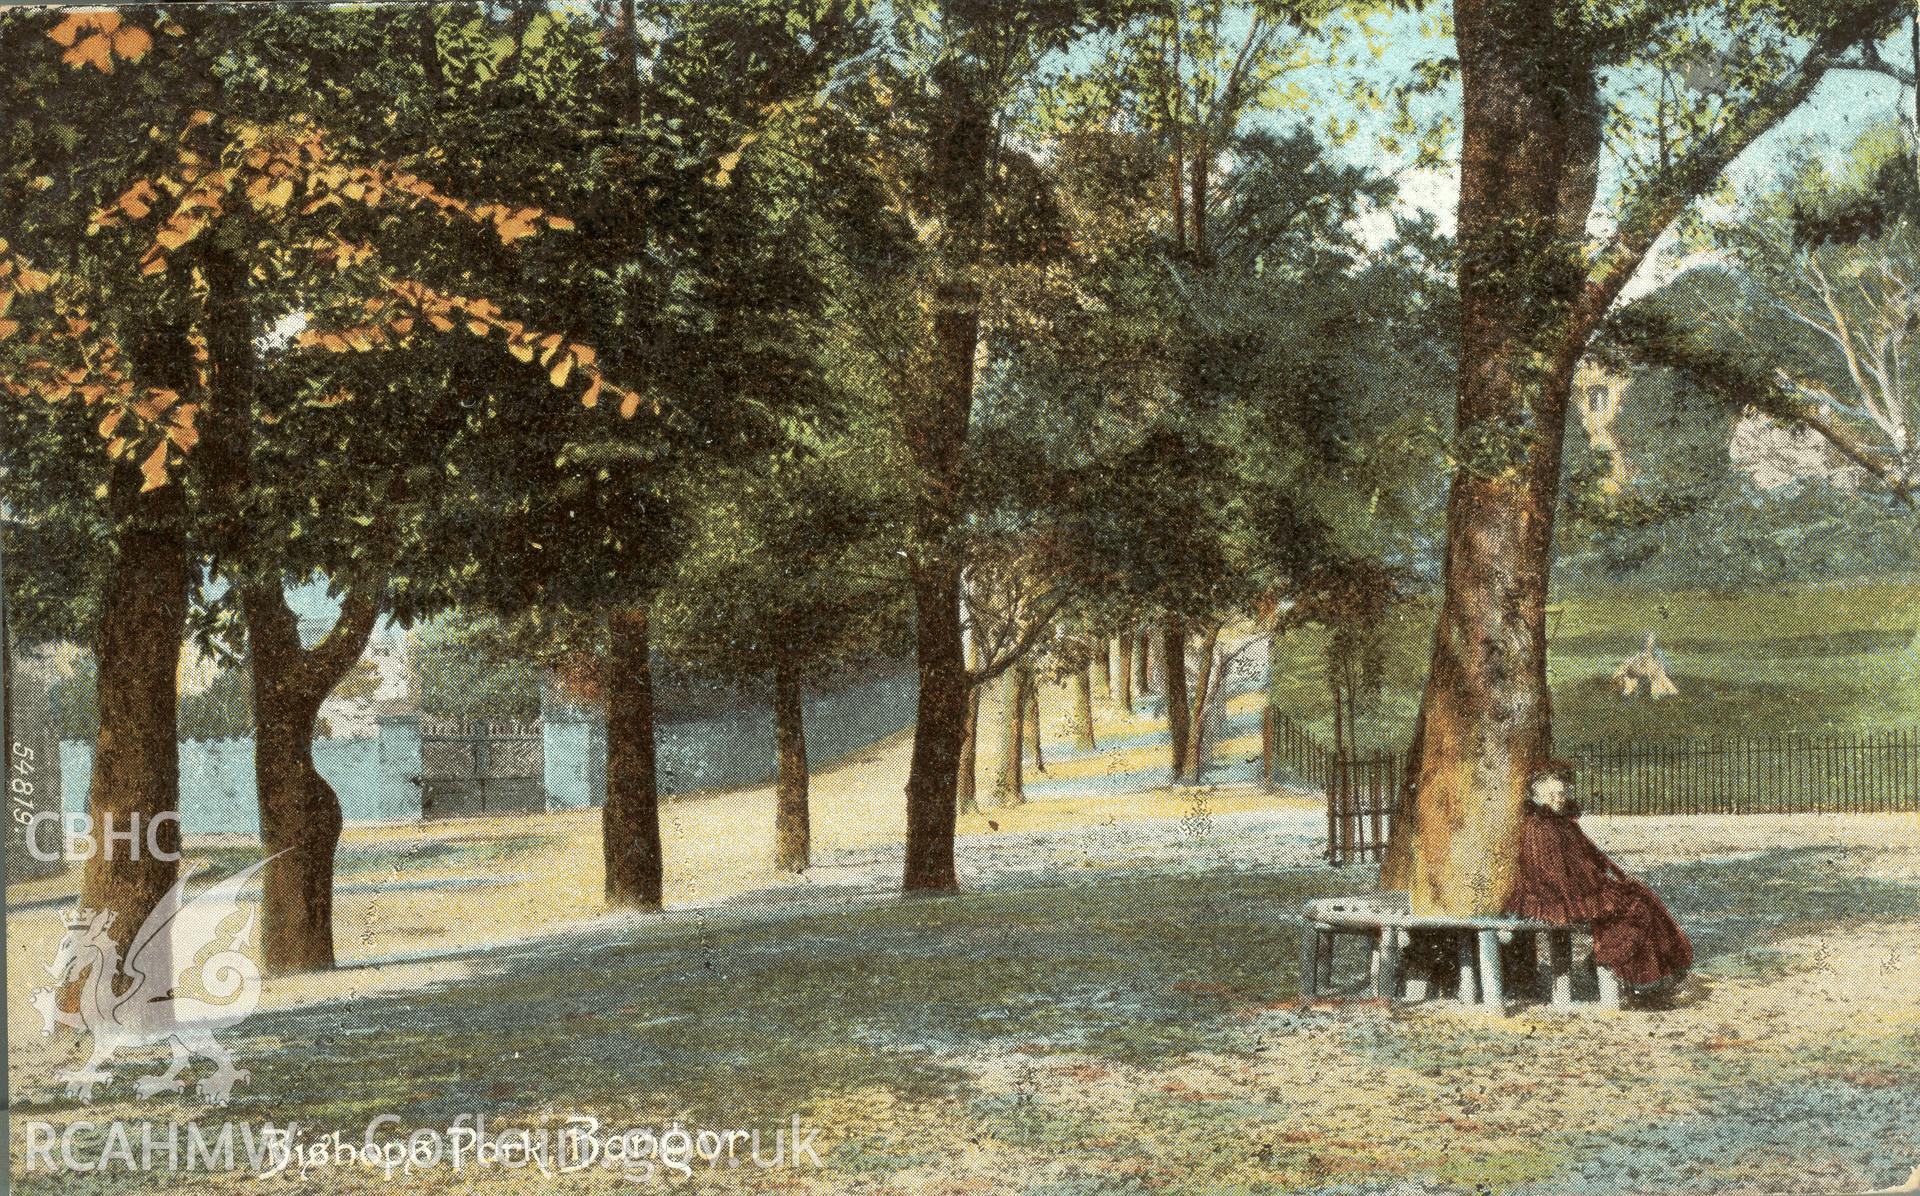 Digitised postcard image of Bishops Park, Bangor, with figures, F. Frith and Co. Produced by Parks and Gardens Data Services, from an original item in the Peter Davis Collection at Parks and Gardens UK. We hold only web-resolution images of this collection, suitable for viewing on screen and for research purposes only. We do not hold the original images, or publication quality scans.